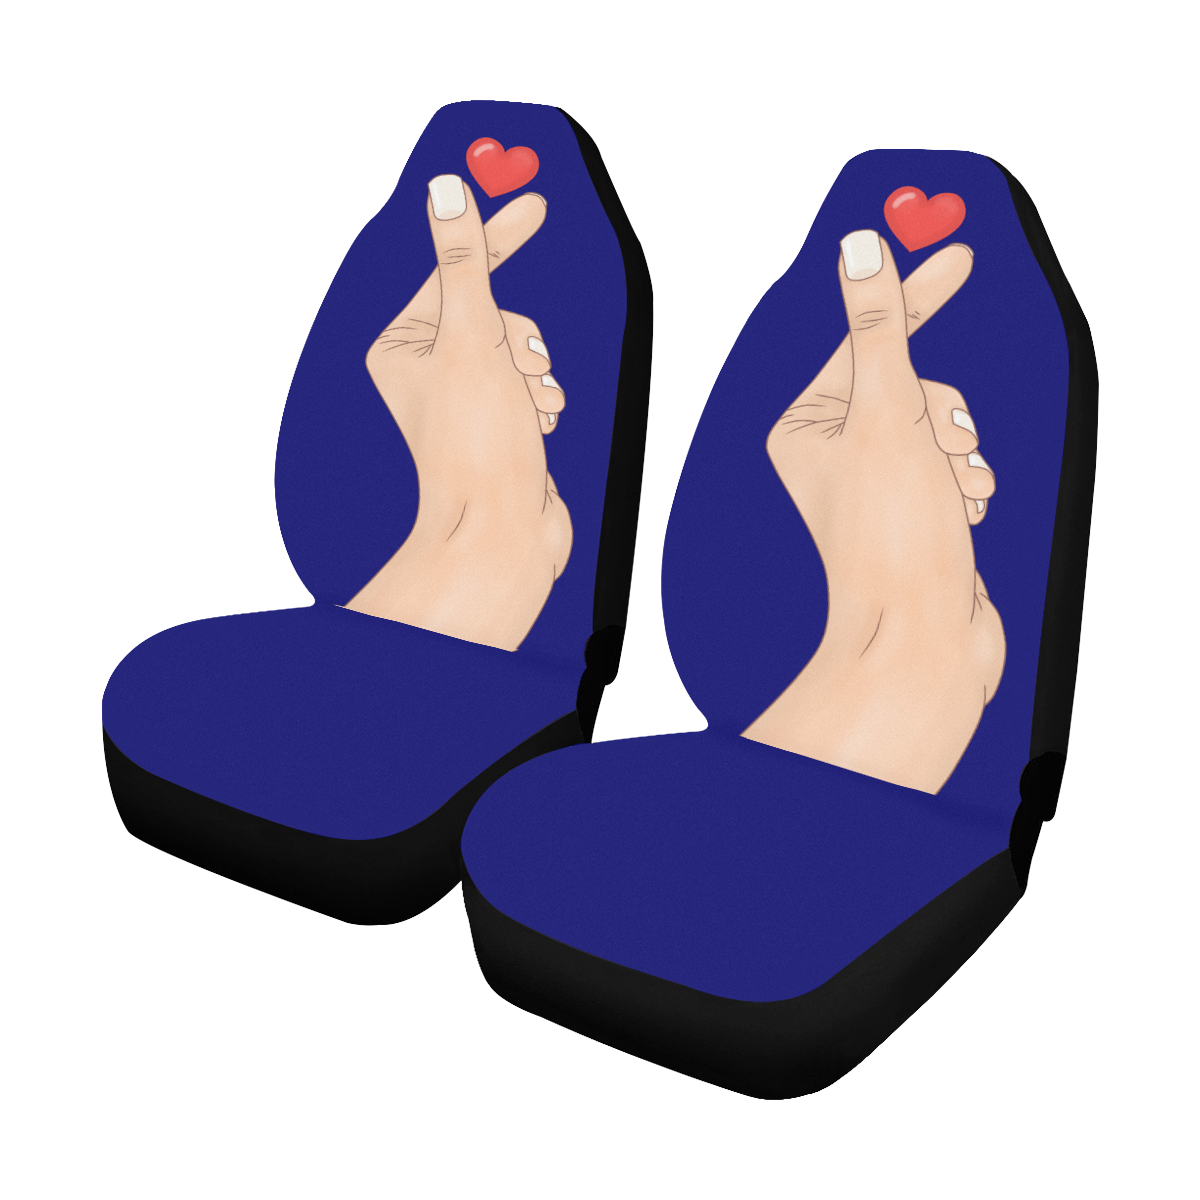 Hand With Finger Heart / Blue Car Seat Covers (Set of 2)